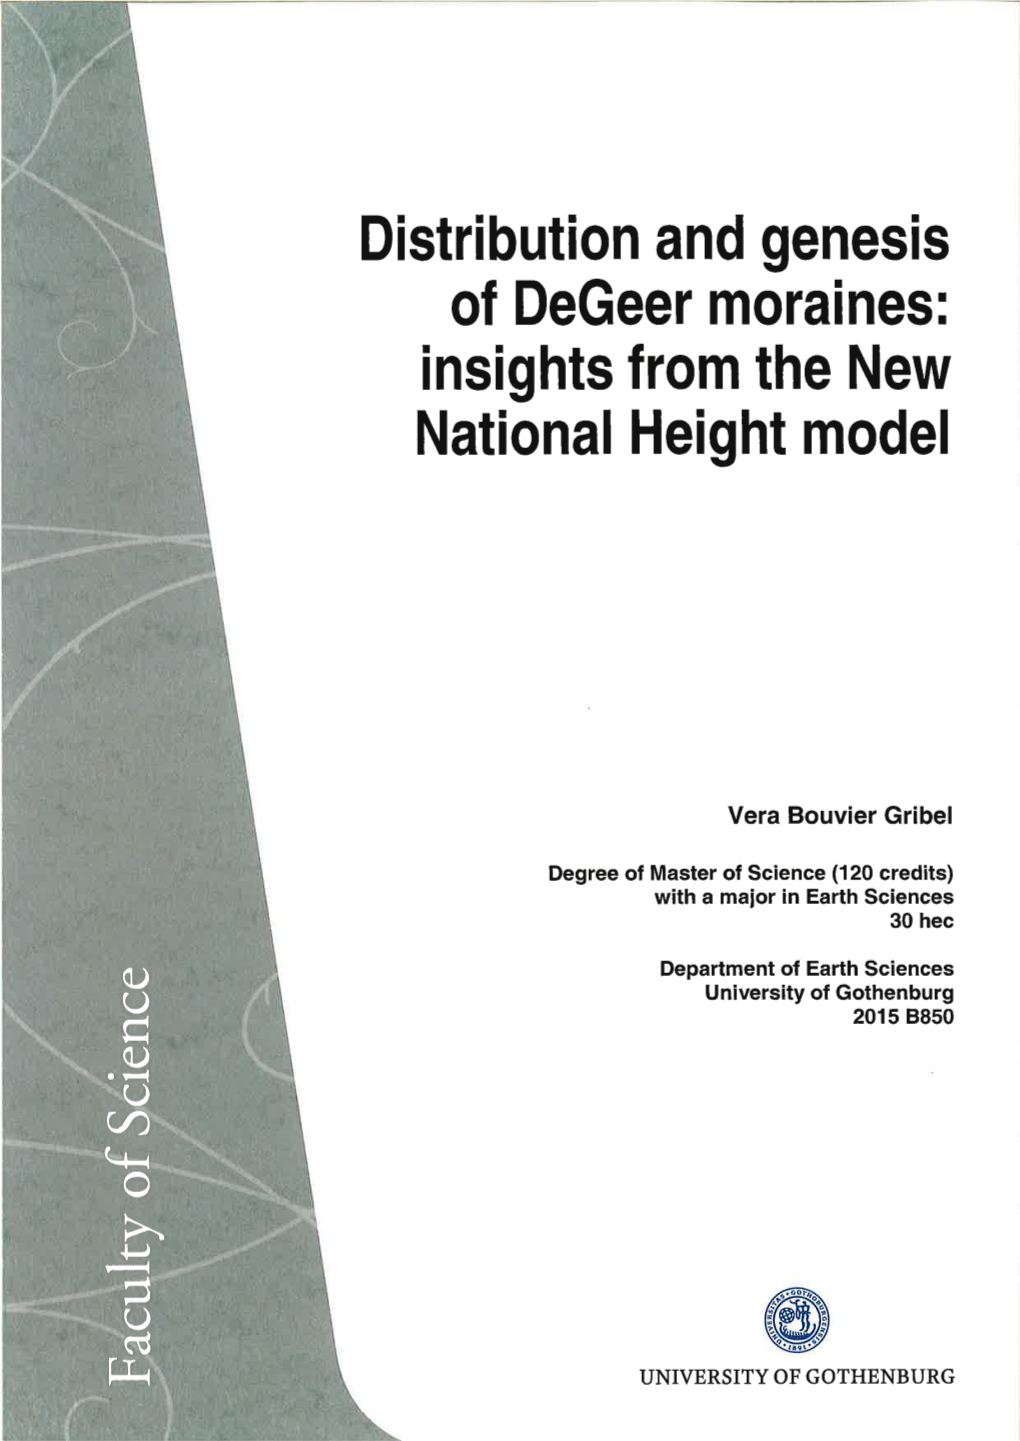 Distribution and Genesis of Degeer Moraines: Insights from the New National Height Model